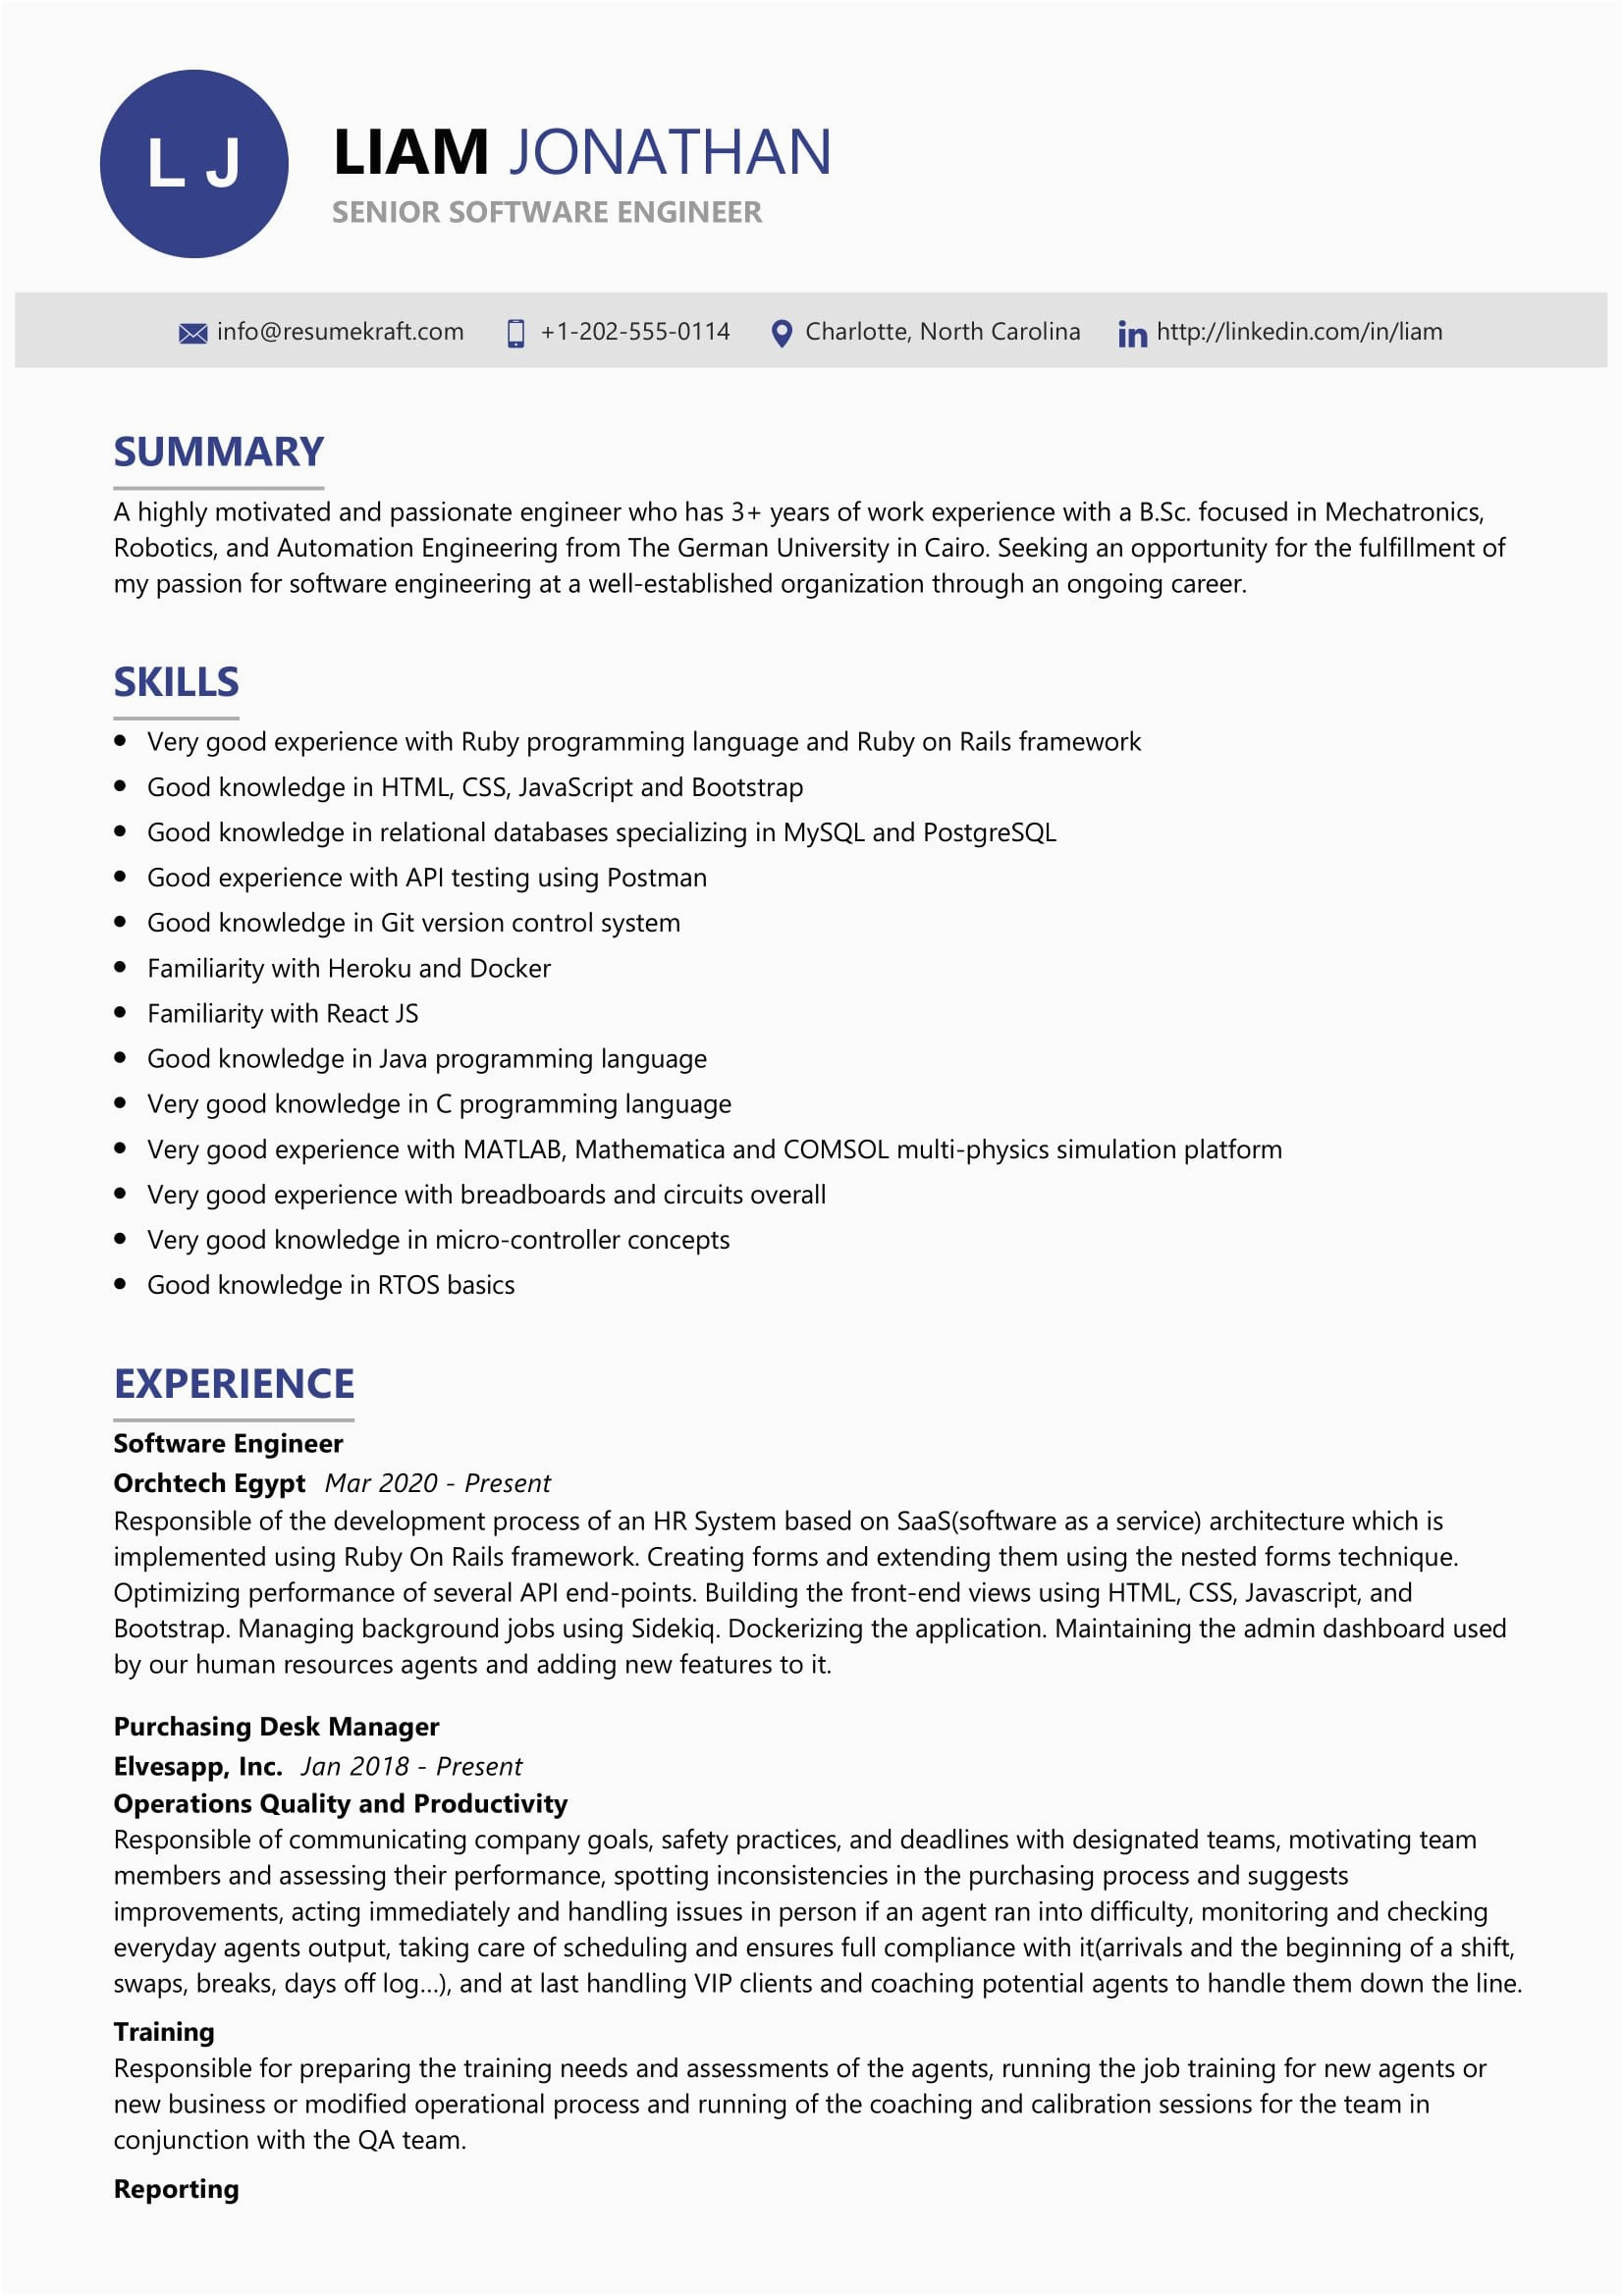 Best Resume Templates for software Engineers Senior software Engineer Resume Sample Resumekraft